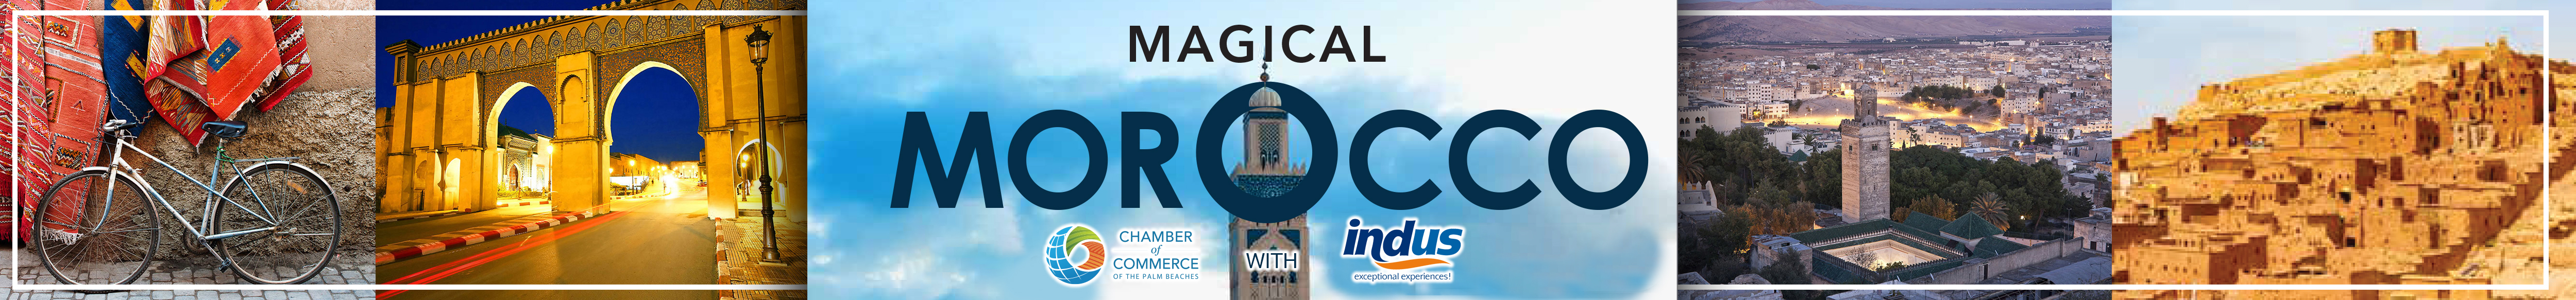 magical morocco booking web banner2